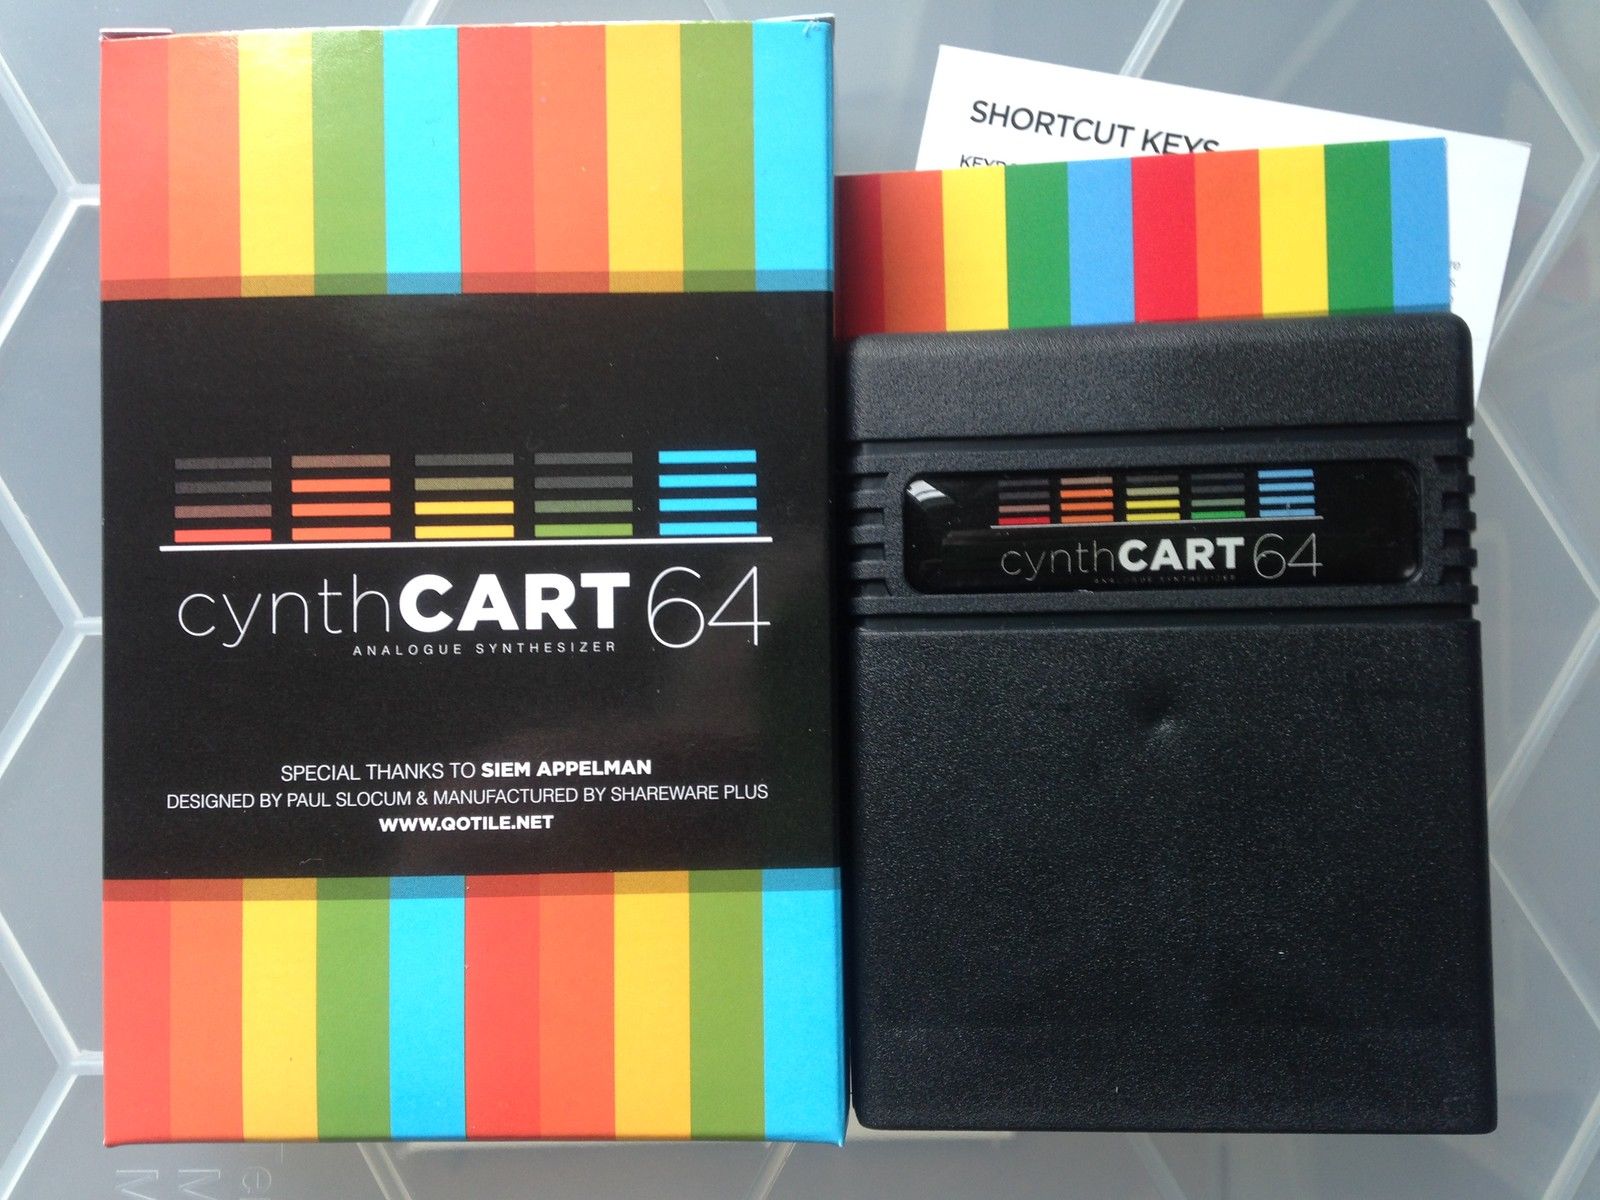 cynth-1 cynthCART 64 v2 Analogue Synthesizer with Midi Support for Commodore 64